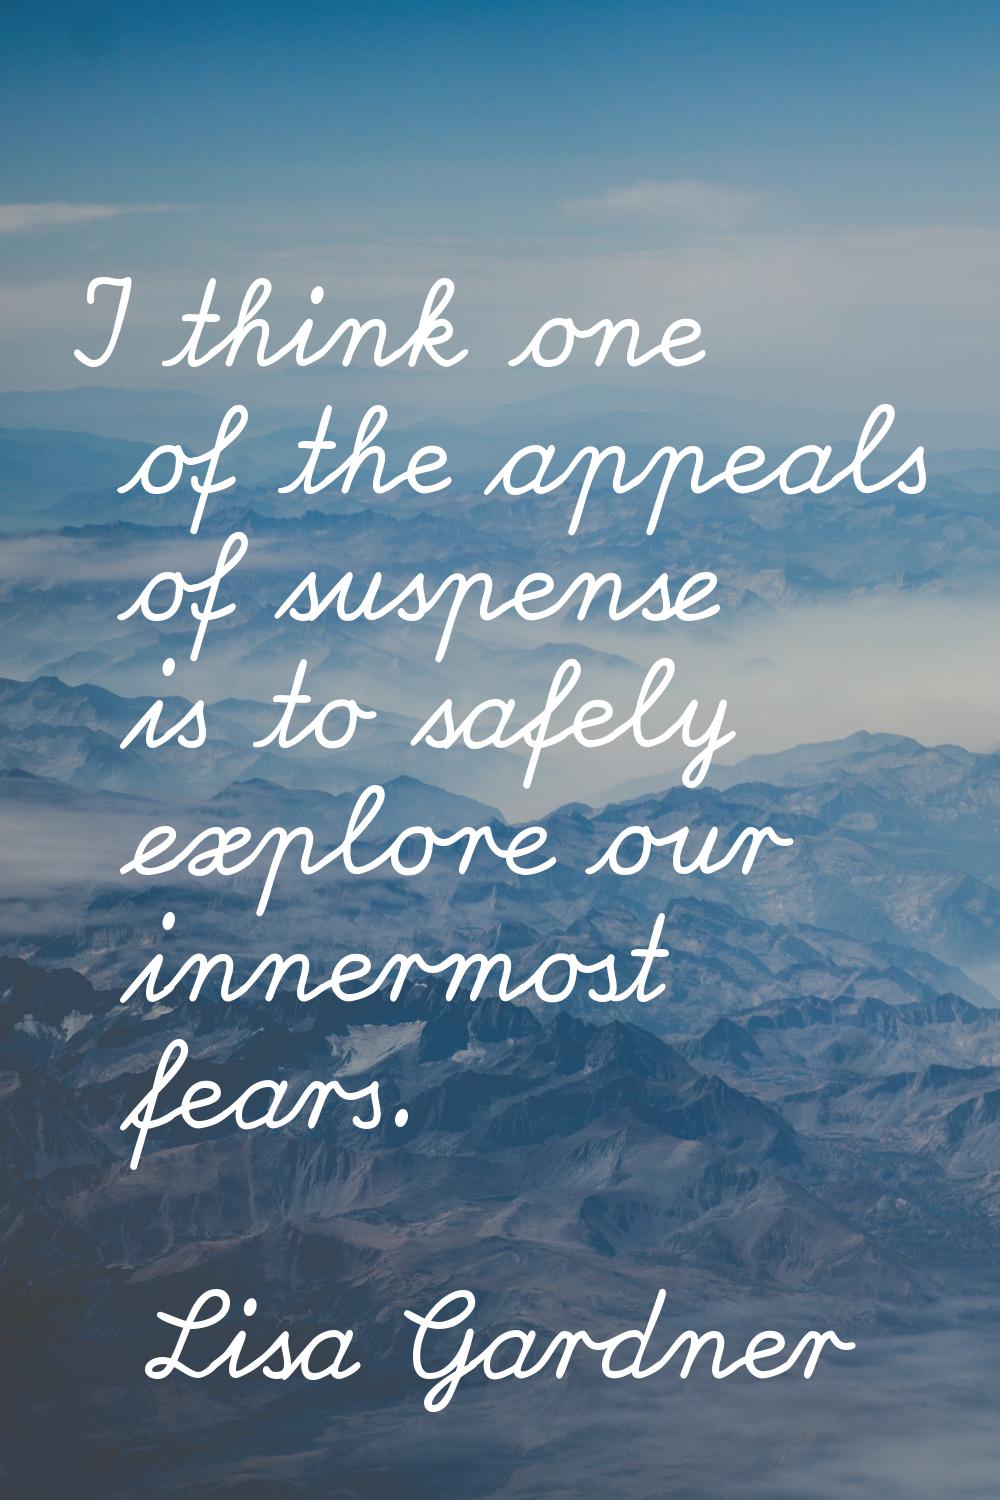 I think one of the appeals of suspense is to safely explore our innermost fears.